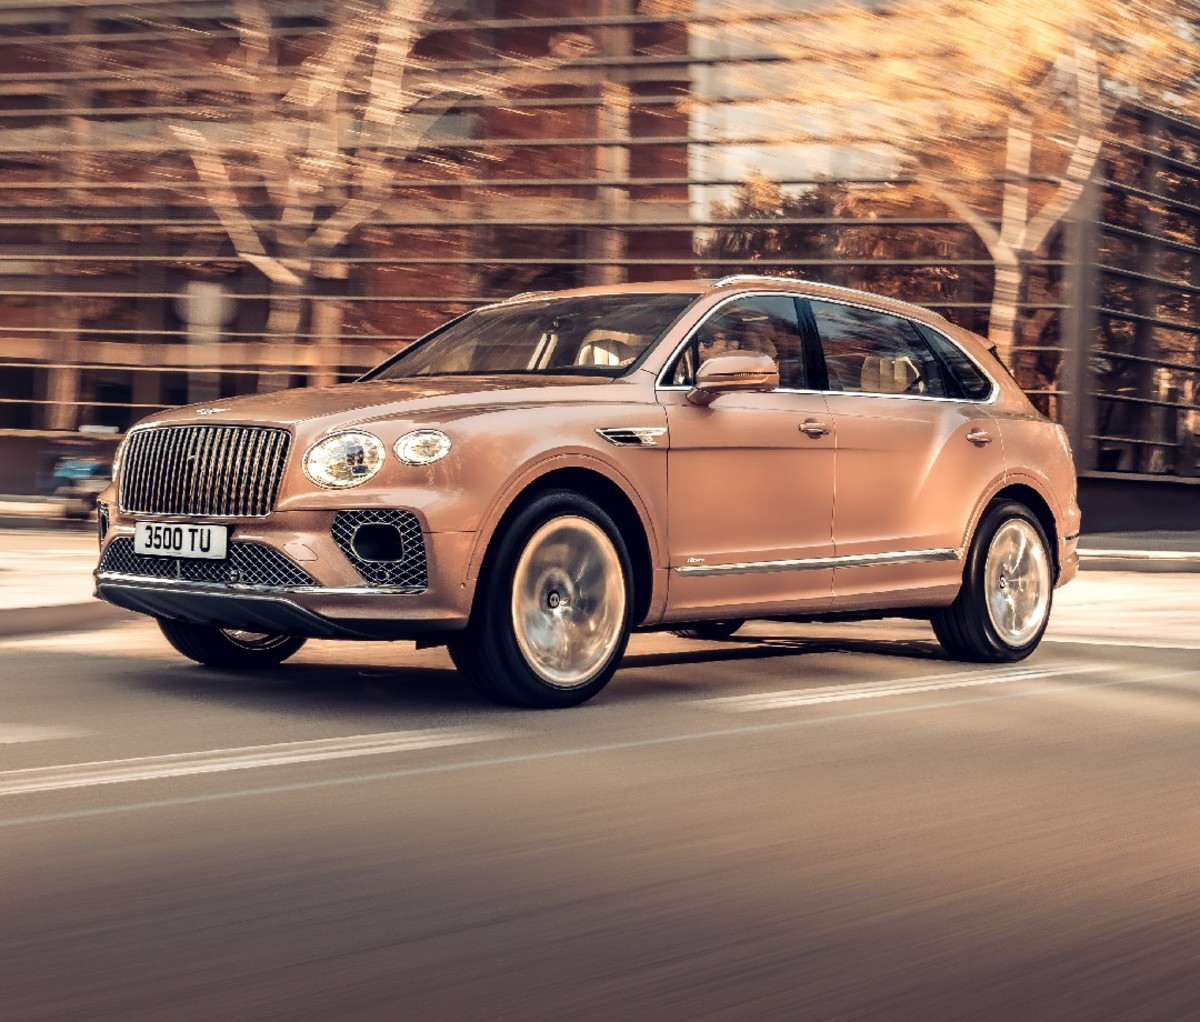 First Look: The 2023 Bentley Bentayga Extended Wheelbase Gets a Serious Stretch